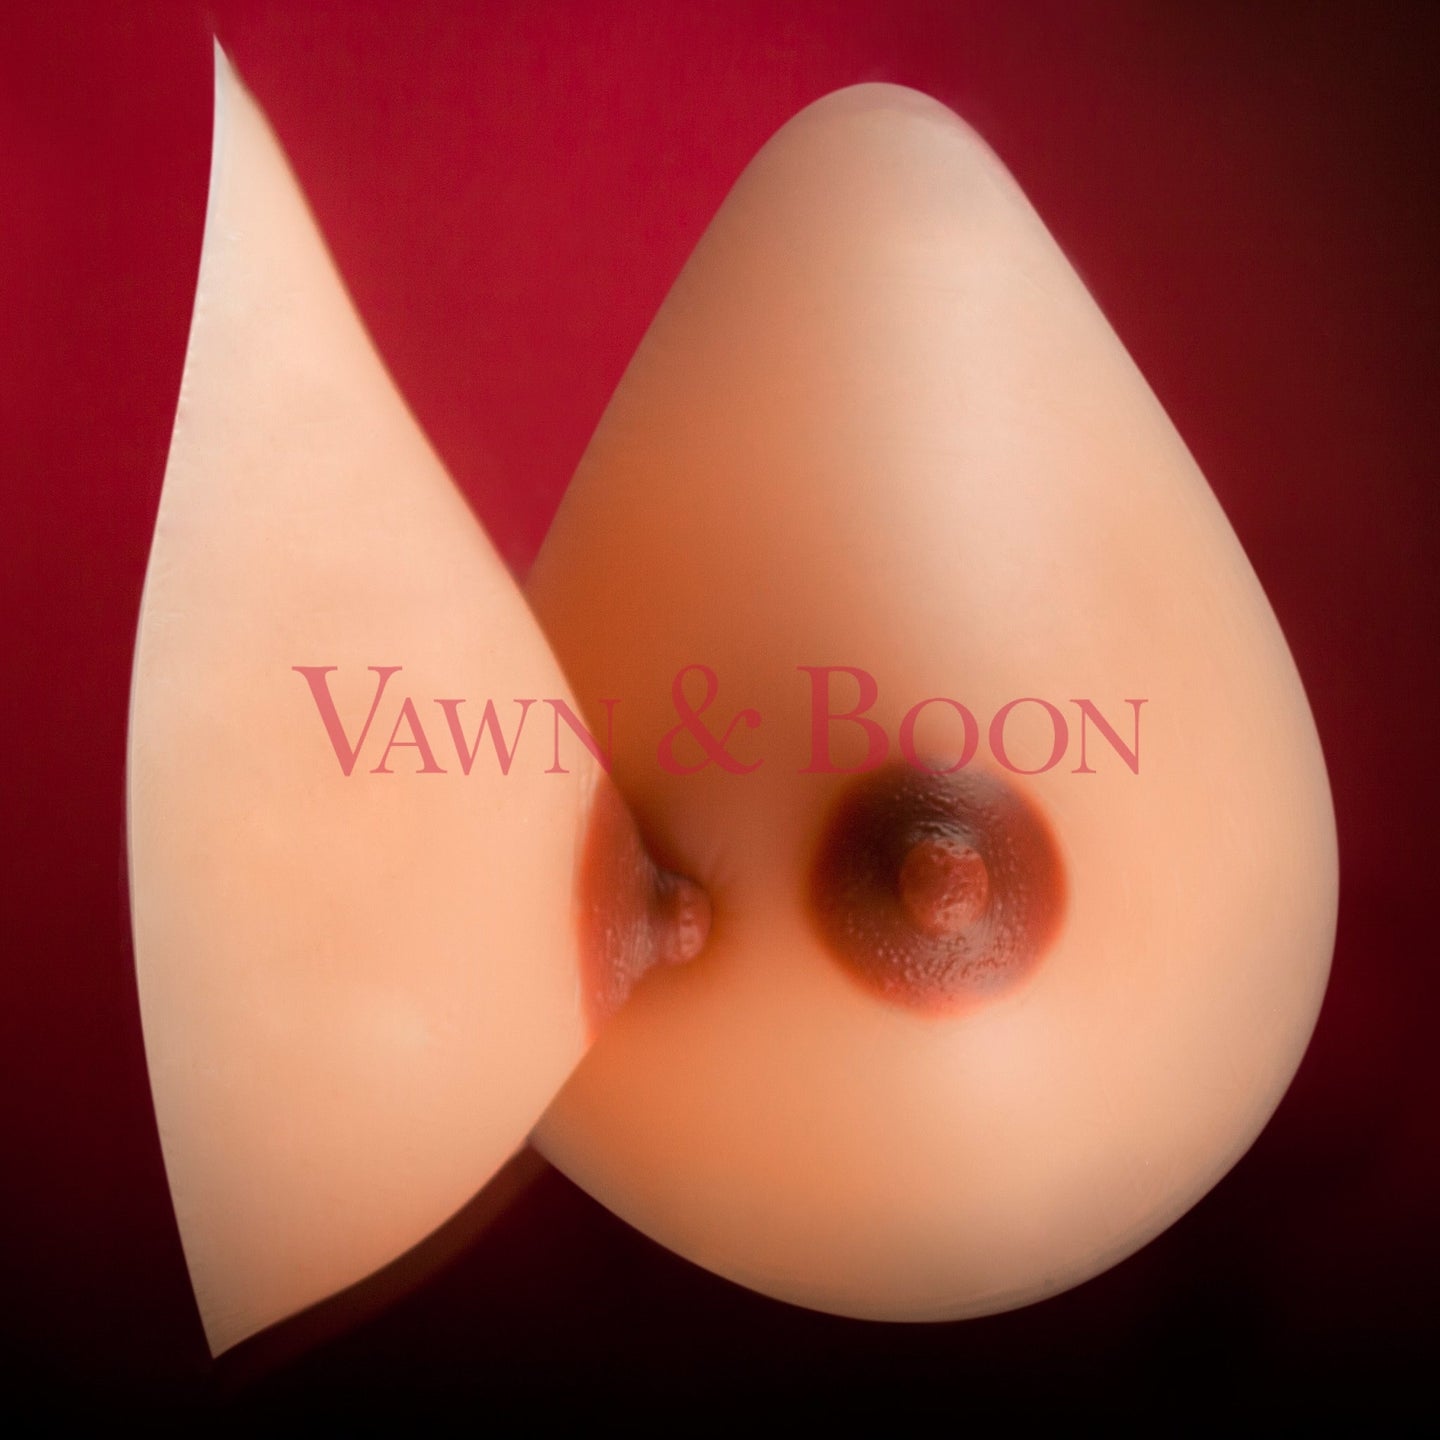 Vawn and Boon Arabella ELECTRA Silicone Breast Forms Mocha Nipples